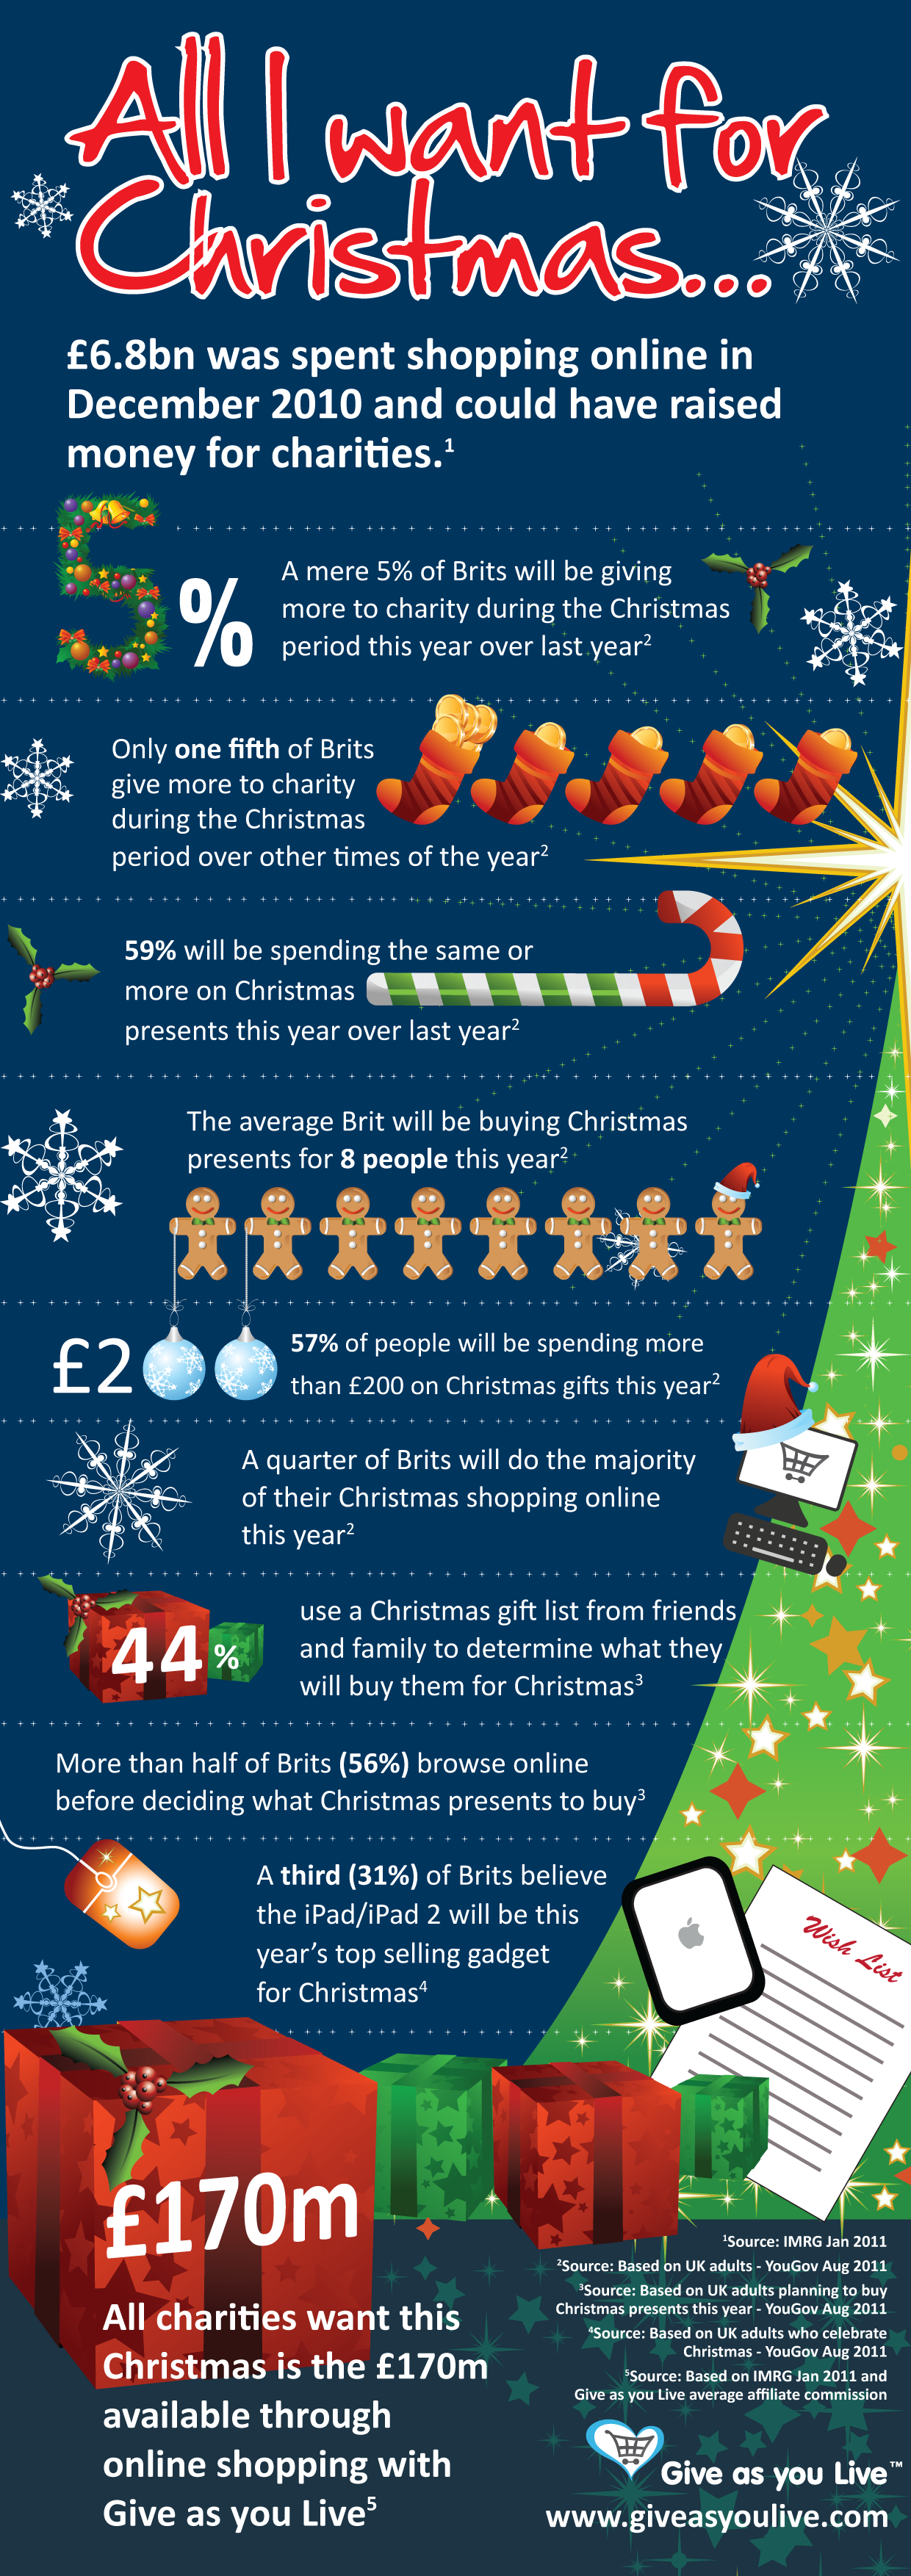 Digital fundraising at Christmas - Give As You Live